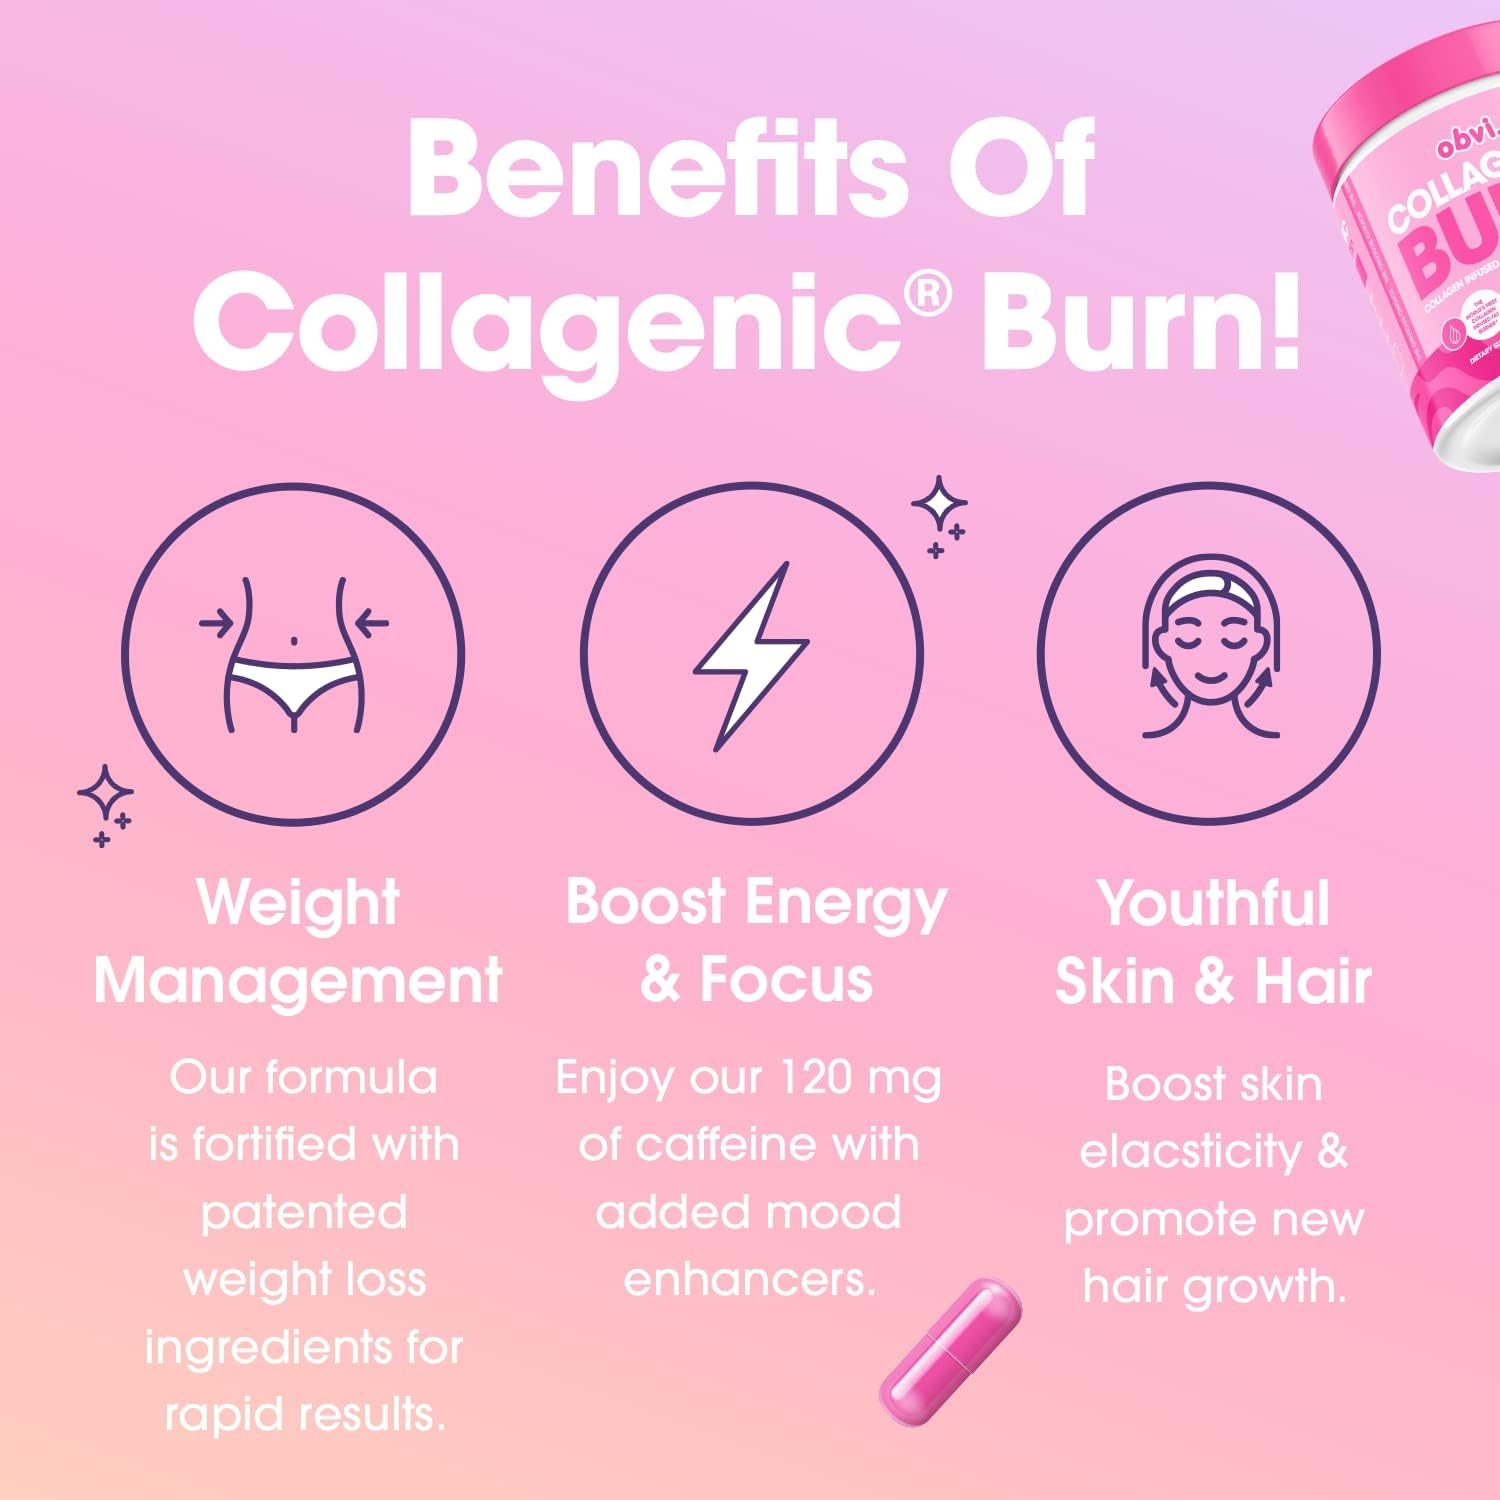 Obvi Collagen Burn, Collagenic Fat Burner, Thermogenic Fat Burner for Weight Loss, Weight Management, Boost Energy and Focus, Youthful Skin and Hair (30 Servings,120 Capsules)